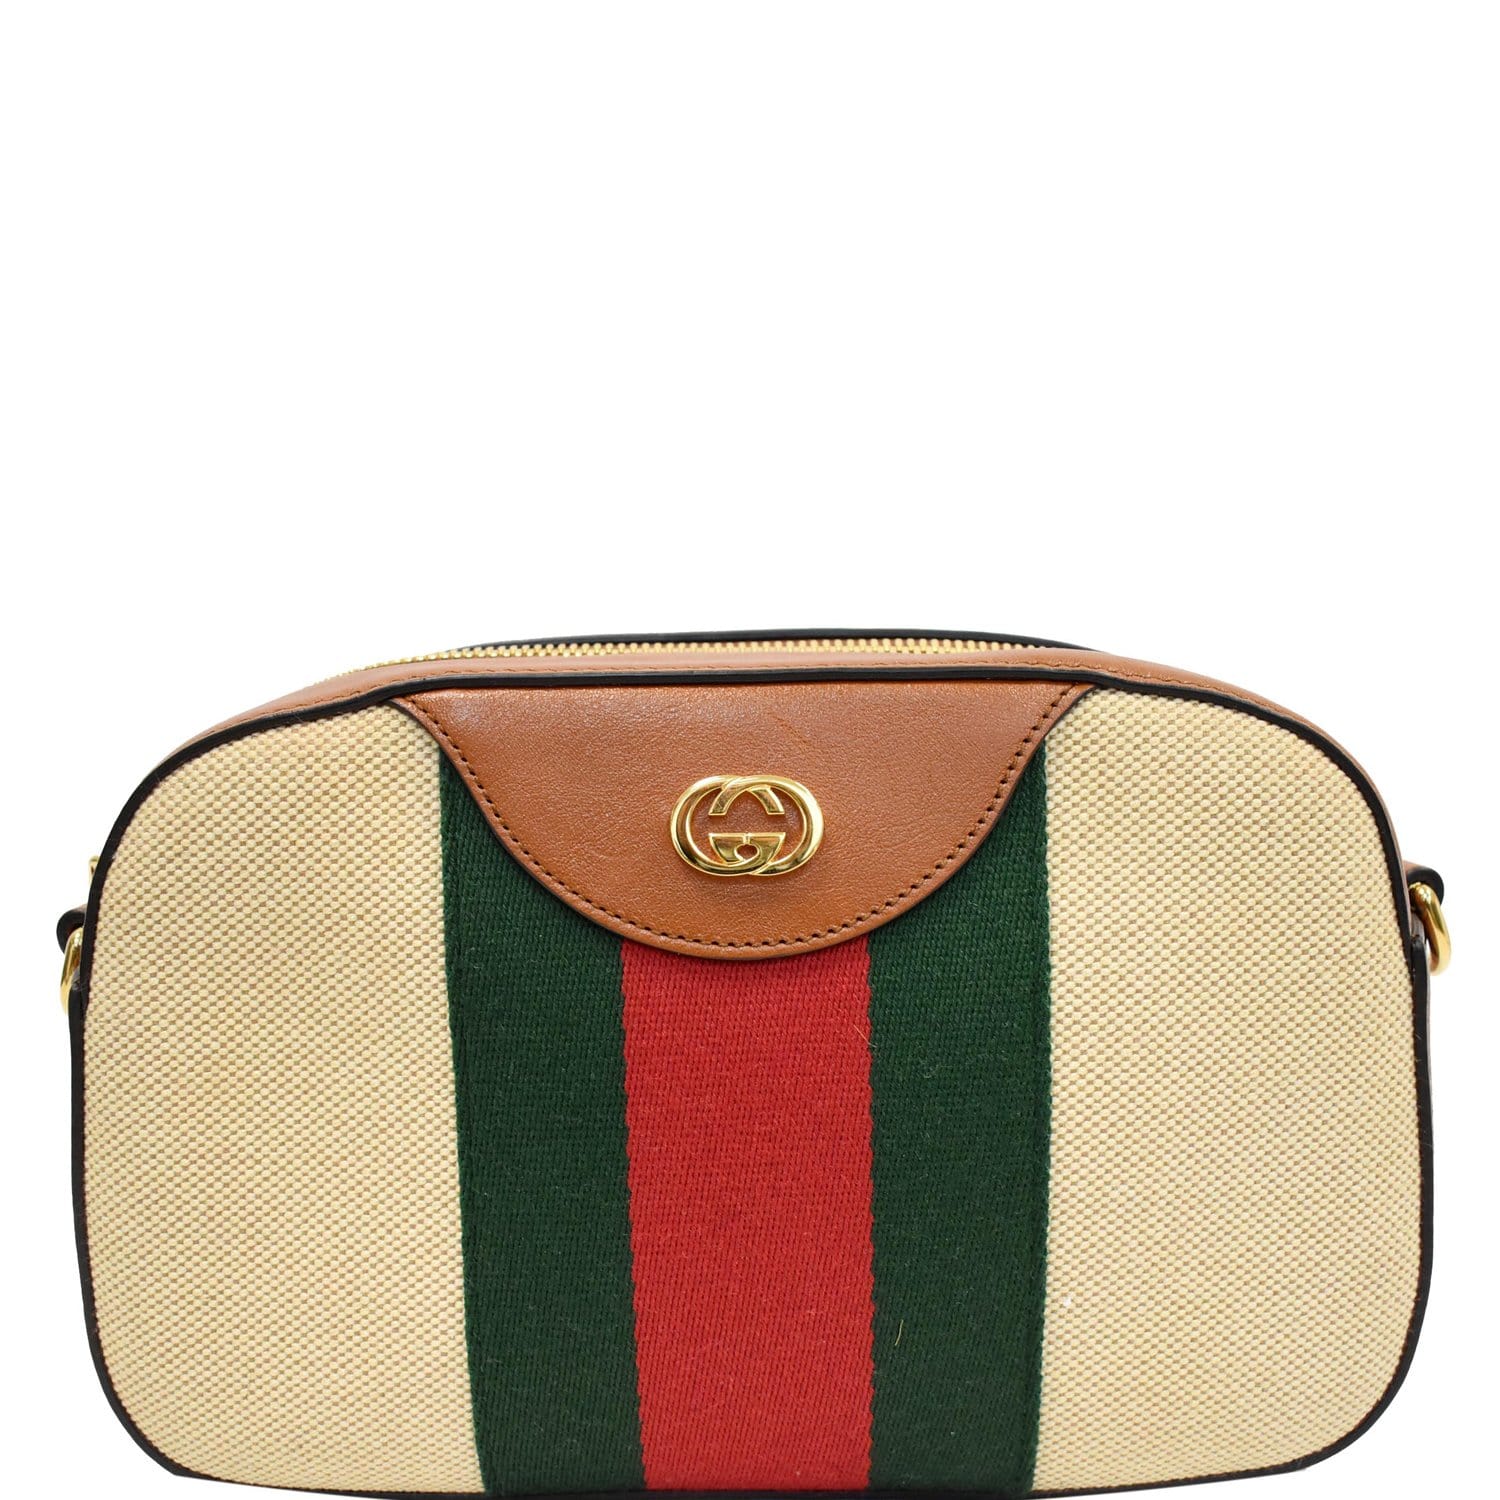 Gucci, Bags, Authentic Gucci Vintage Like Alma Style